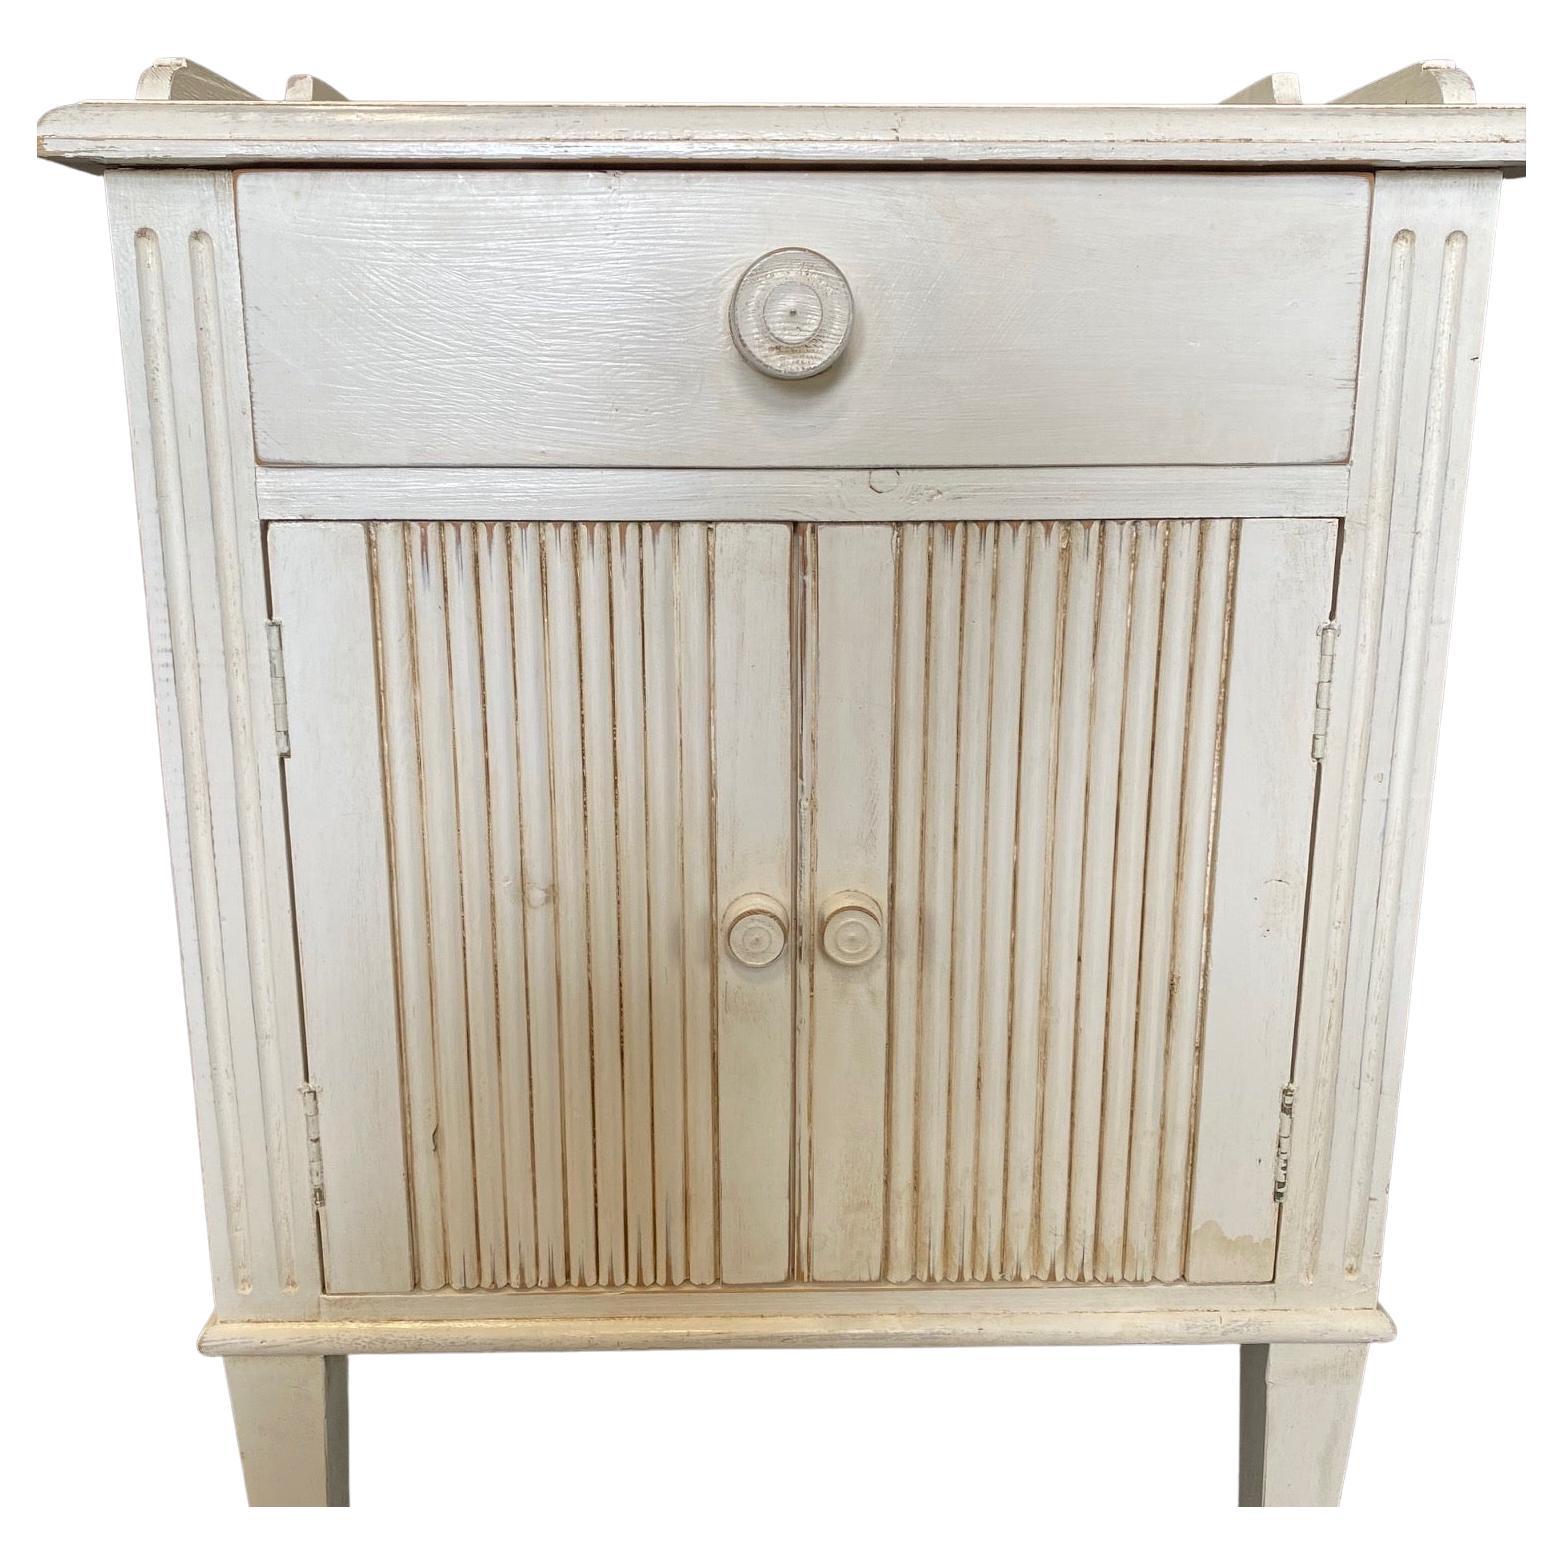 Really classic and lovely pair of cream painted Swedish Gustavian style night stands, bedside tables or side tables having single drawer and double doors with storage within.

Measures: Surface top is 27